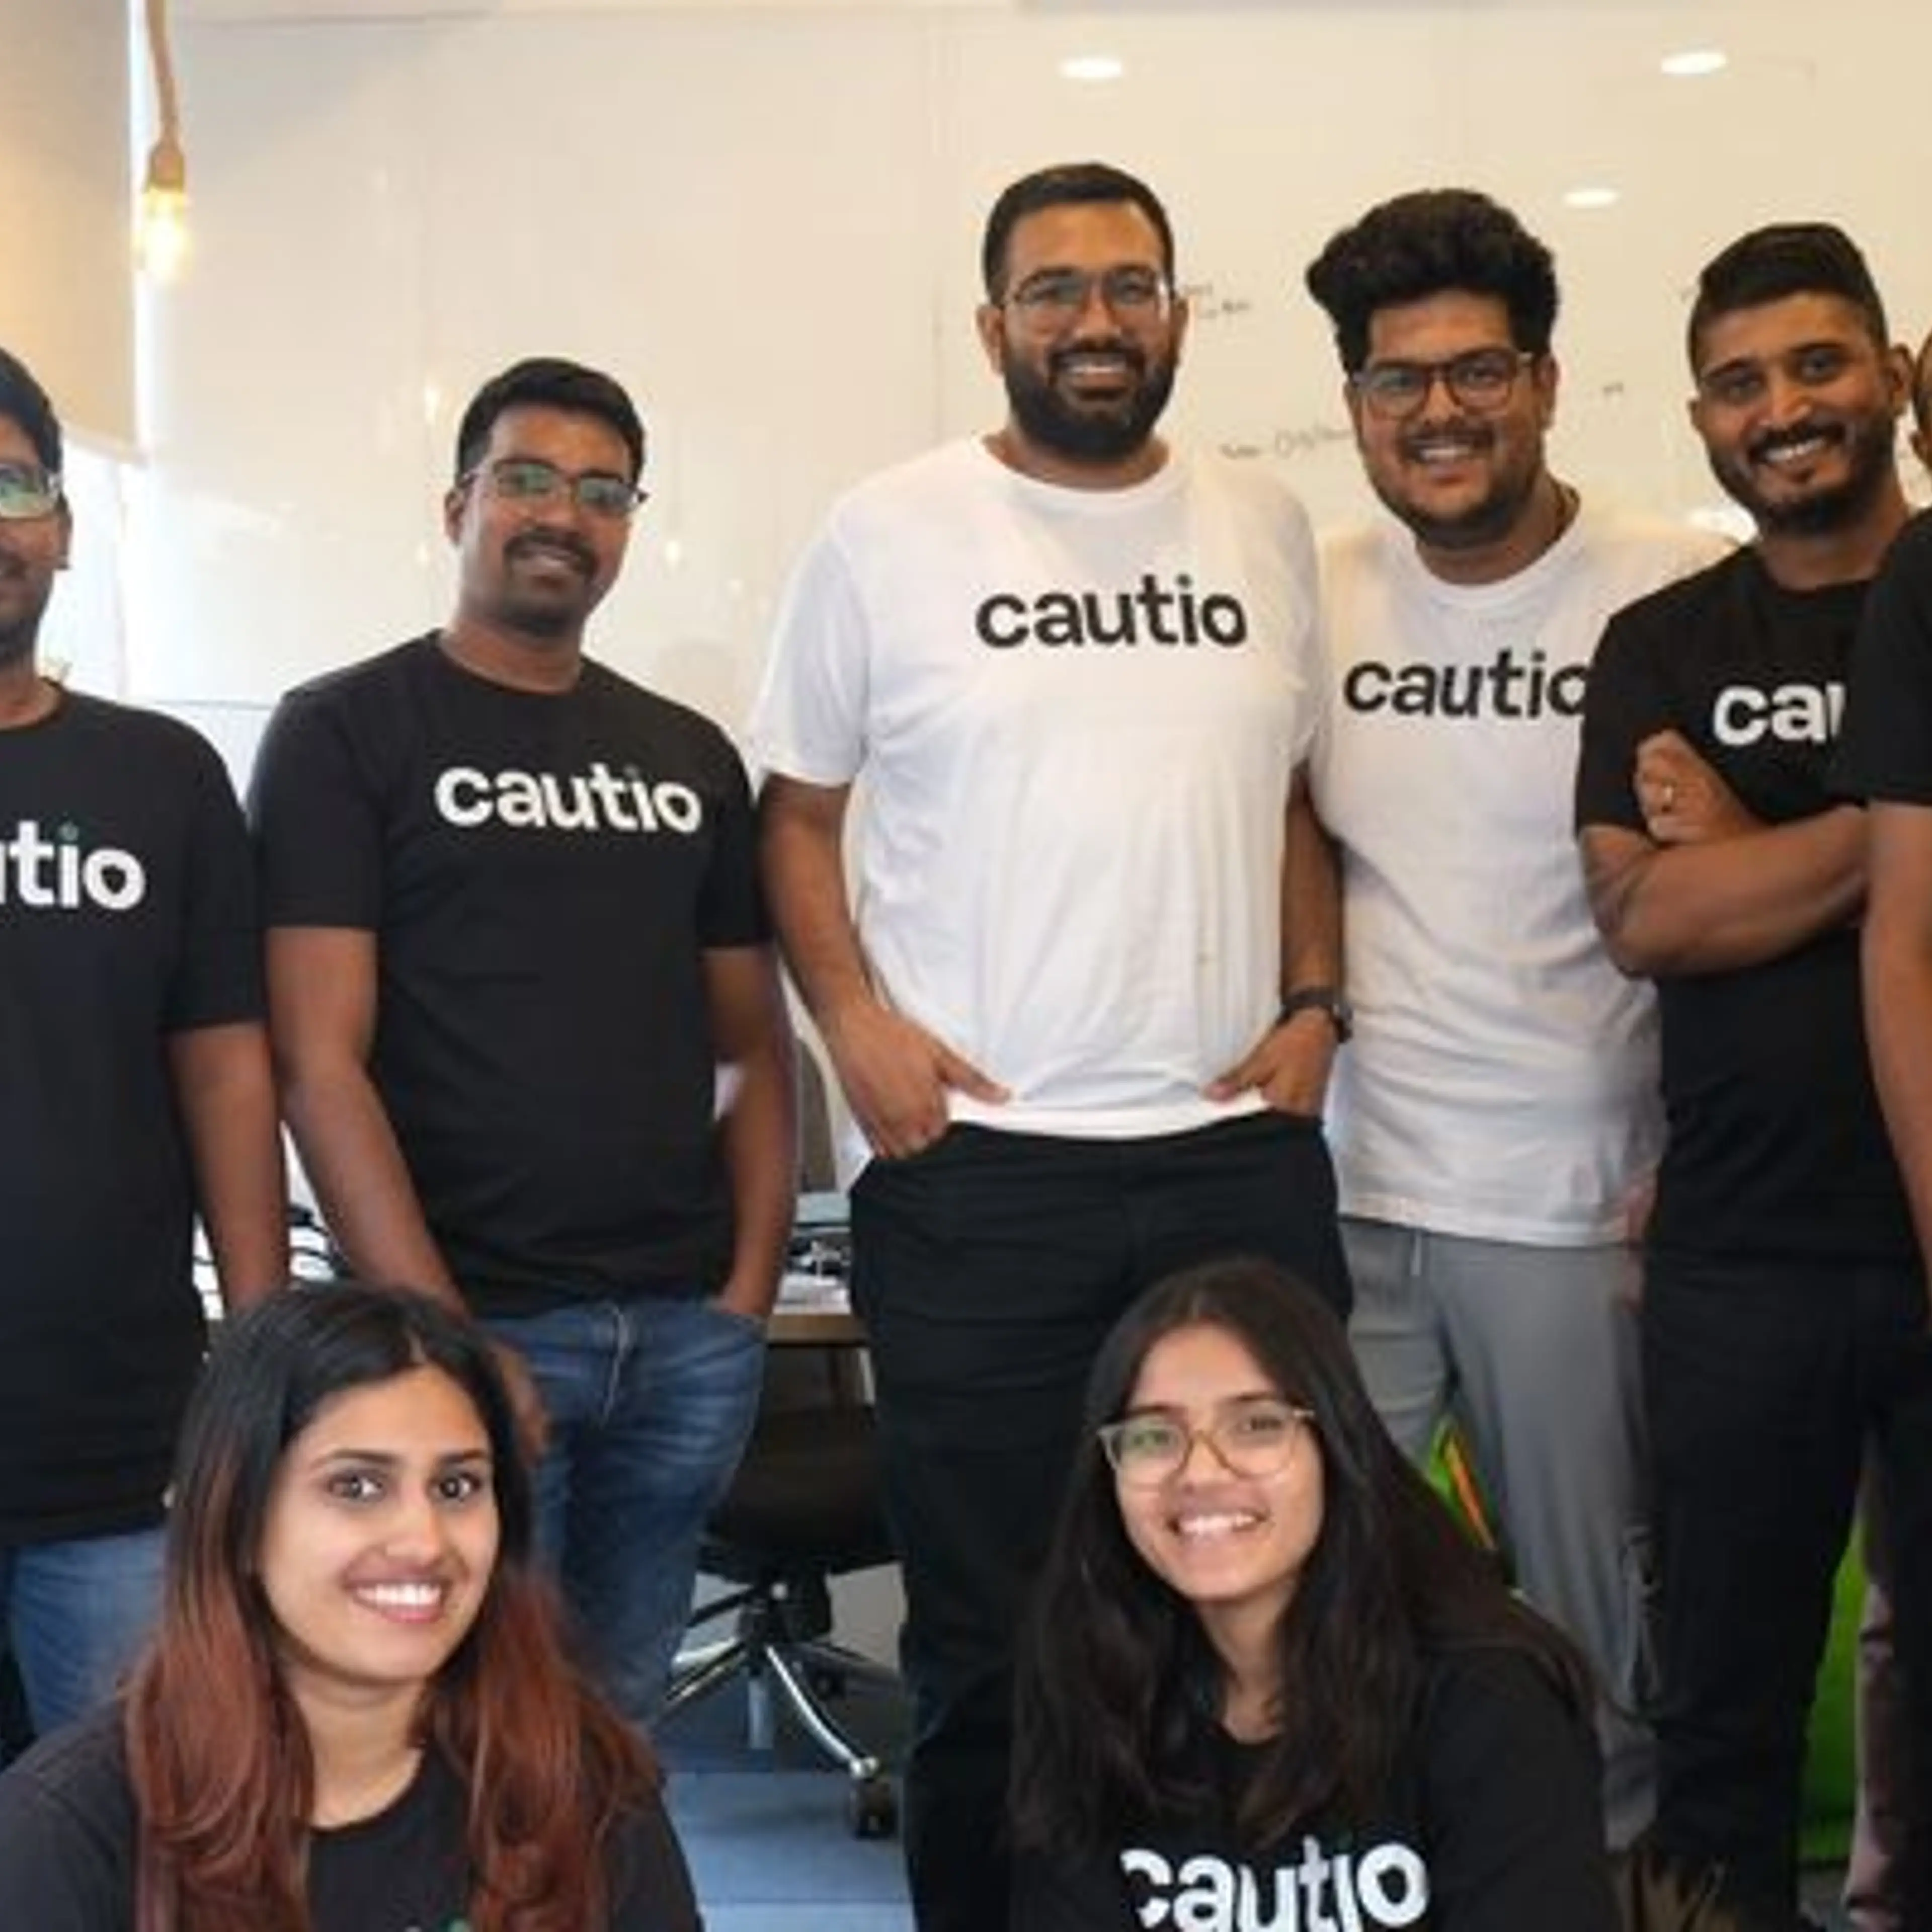 Cautio secures Rs 6.5 Cr in pre-seed round led by Antler and 8i Ventures